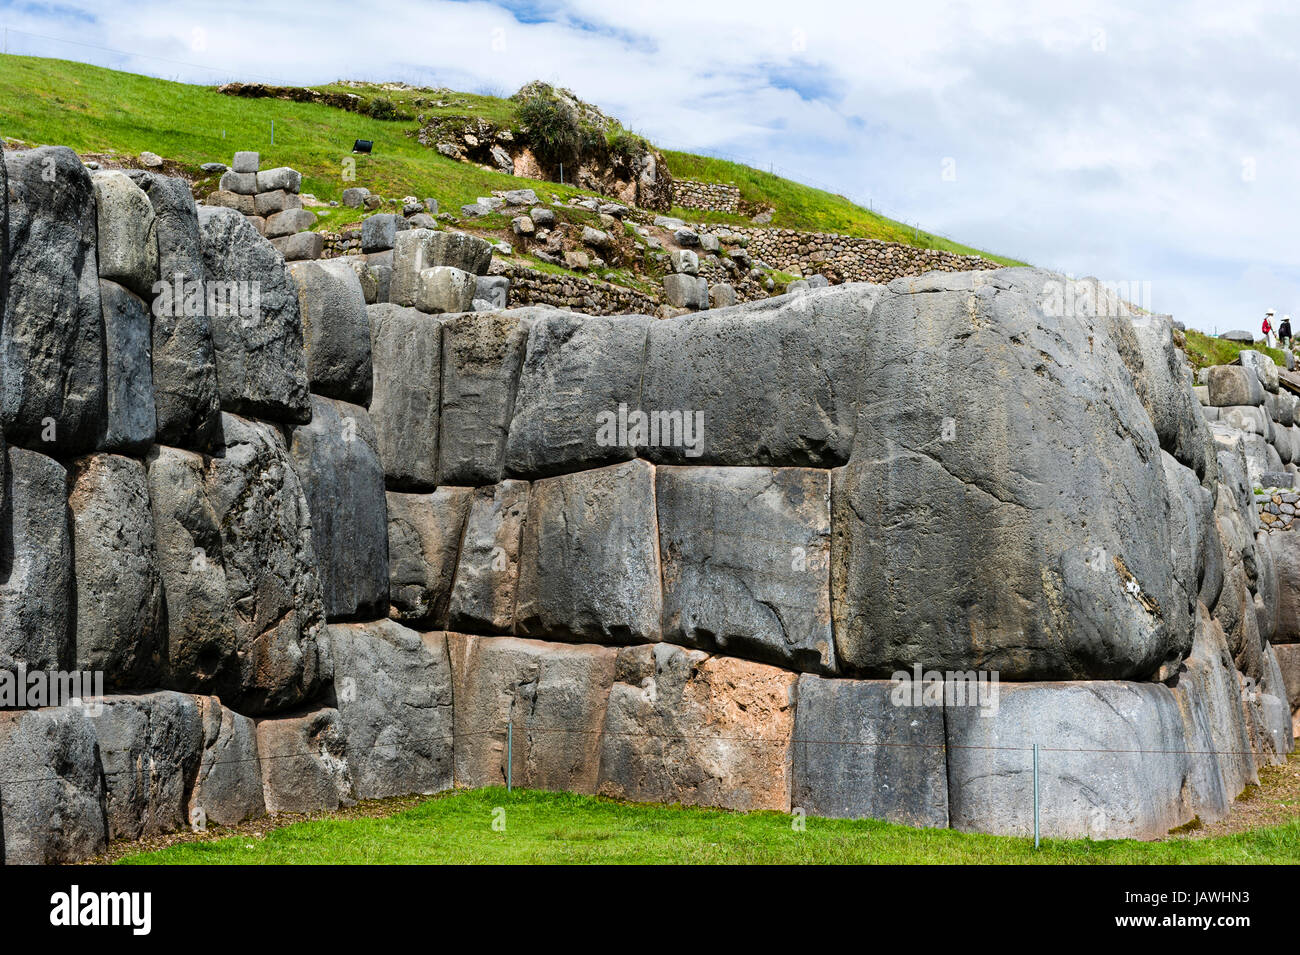 The Inca carved interlocking dry-stone walls from boulders to build a citadel terrace wall. Stock Photo